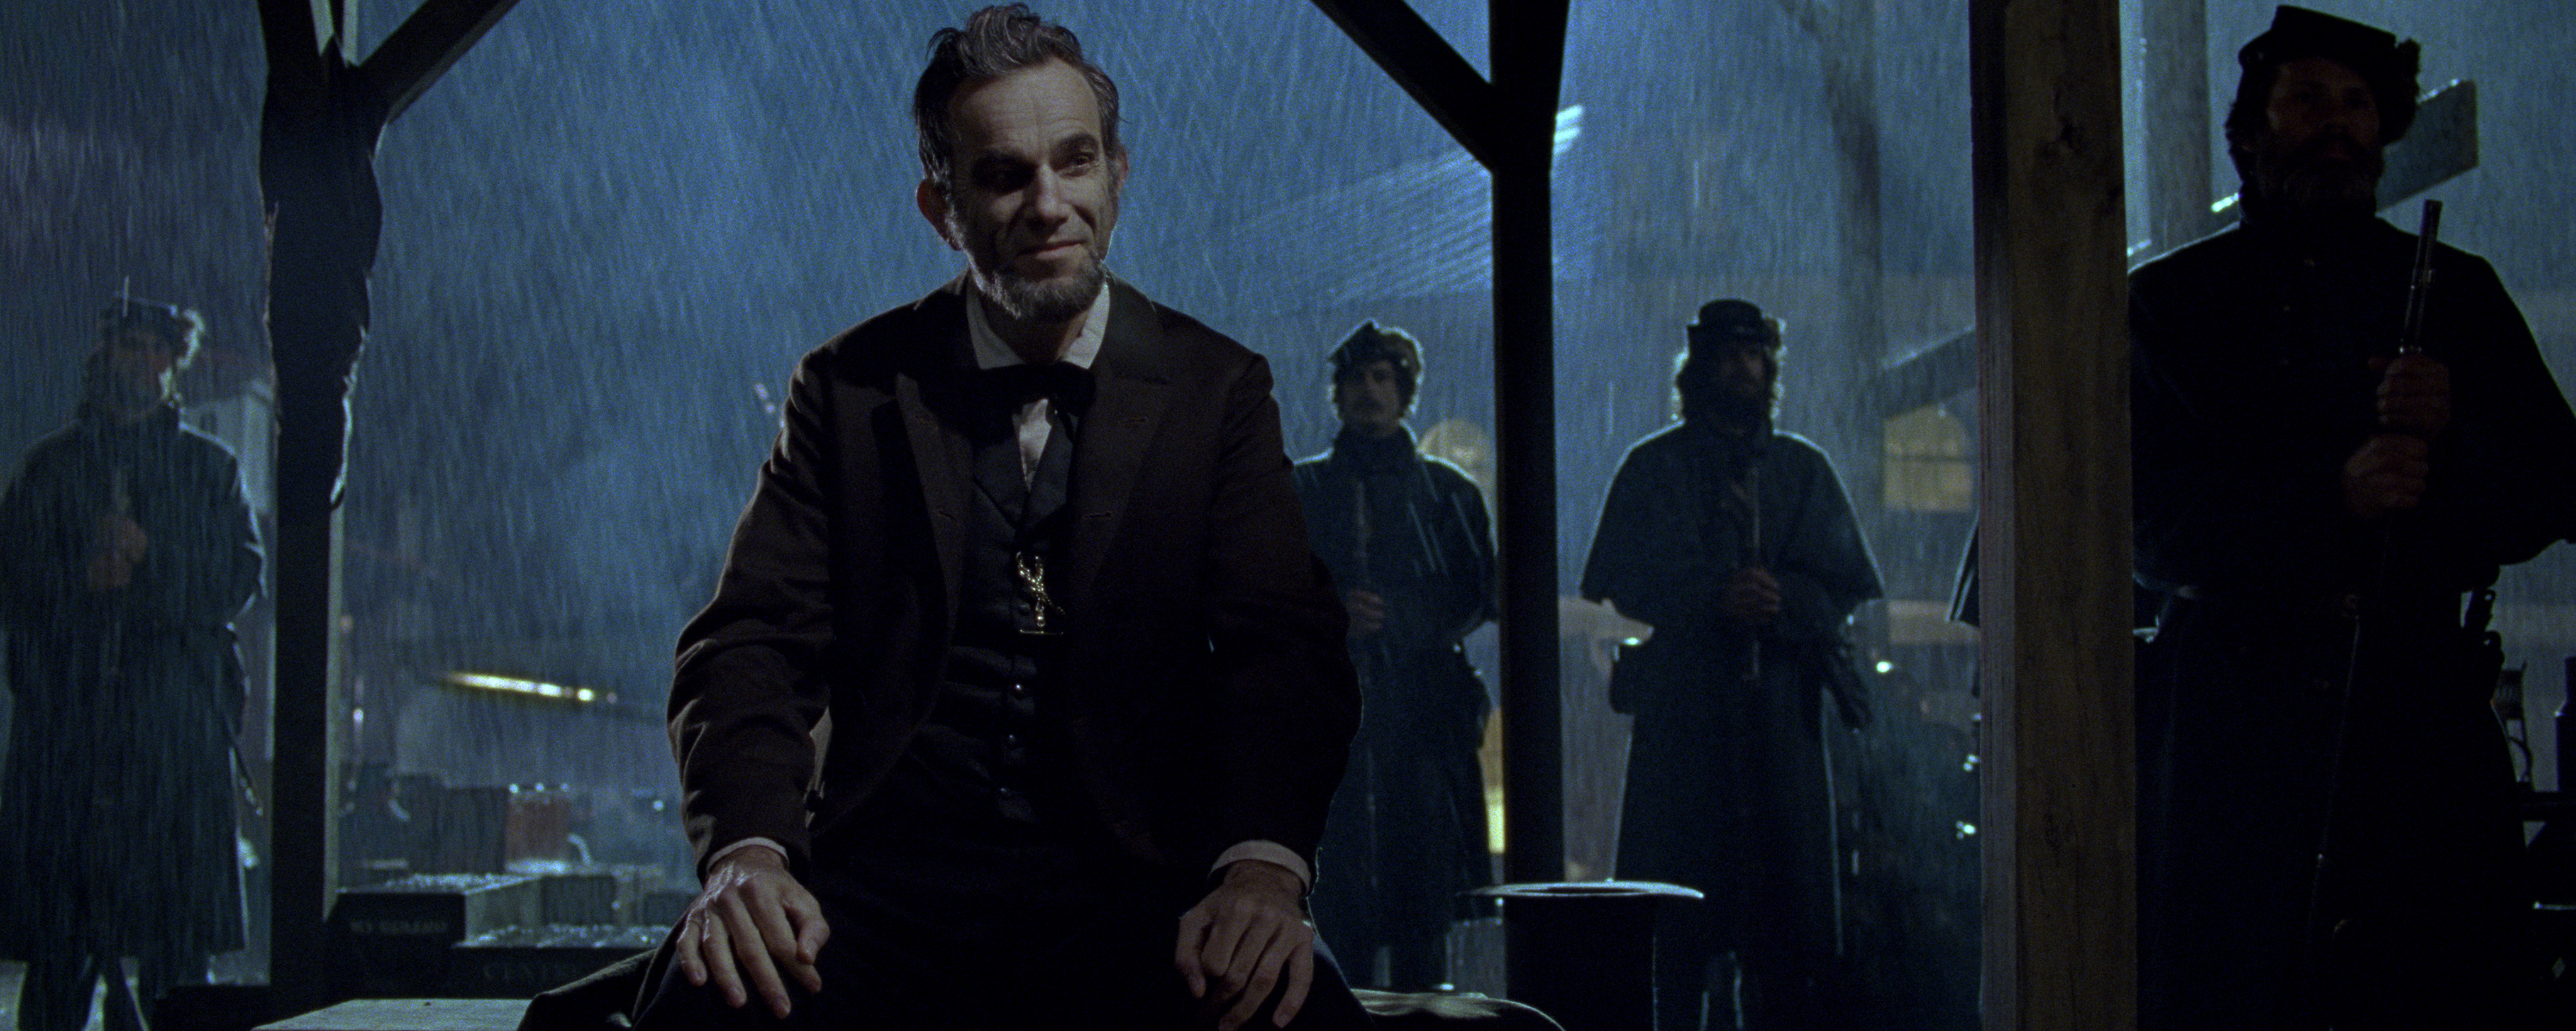 daniel-day-lewis-as-abraham-lincoln-in-lincoln.jpg